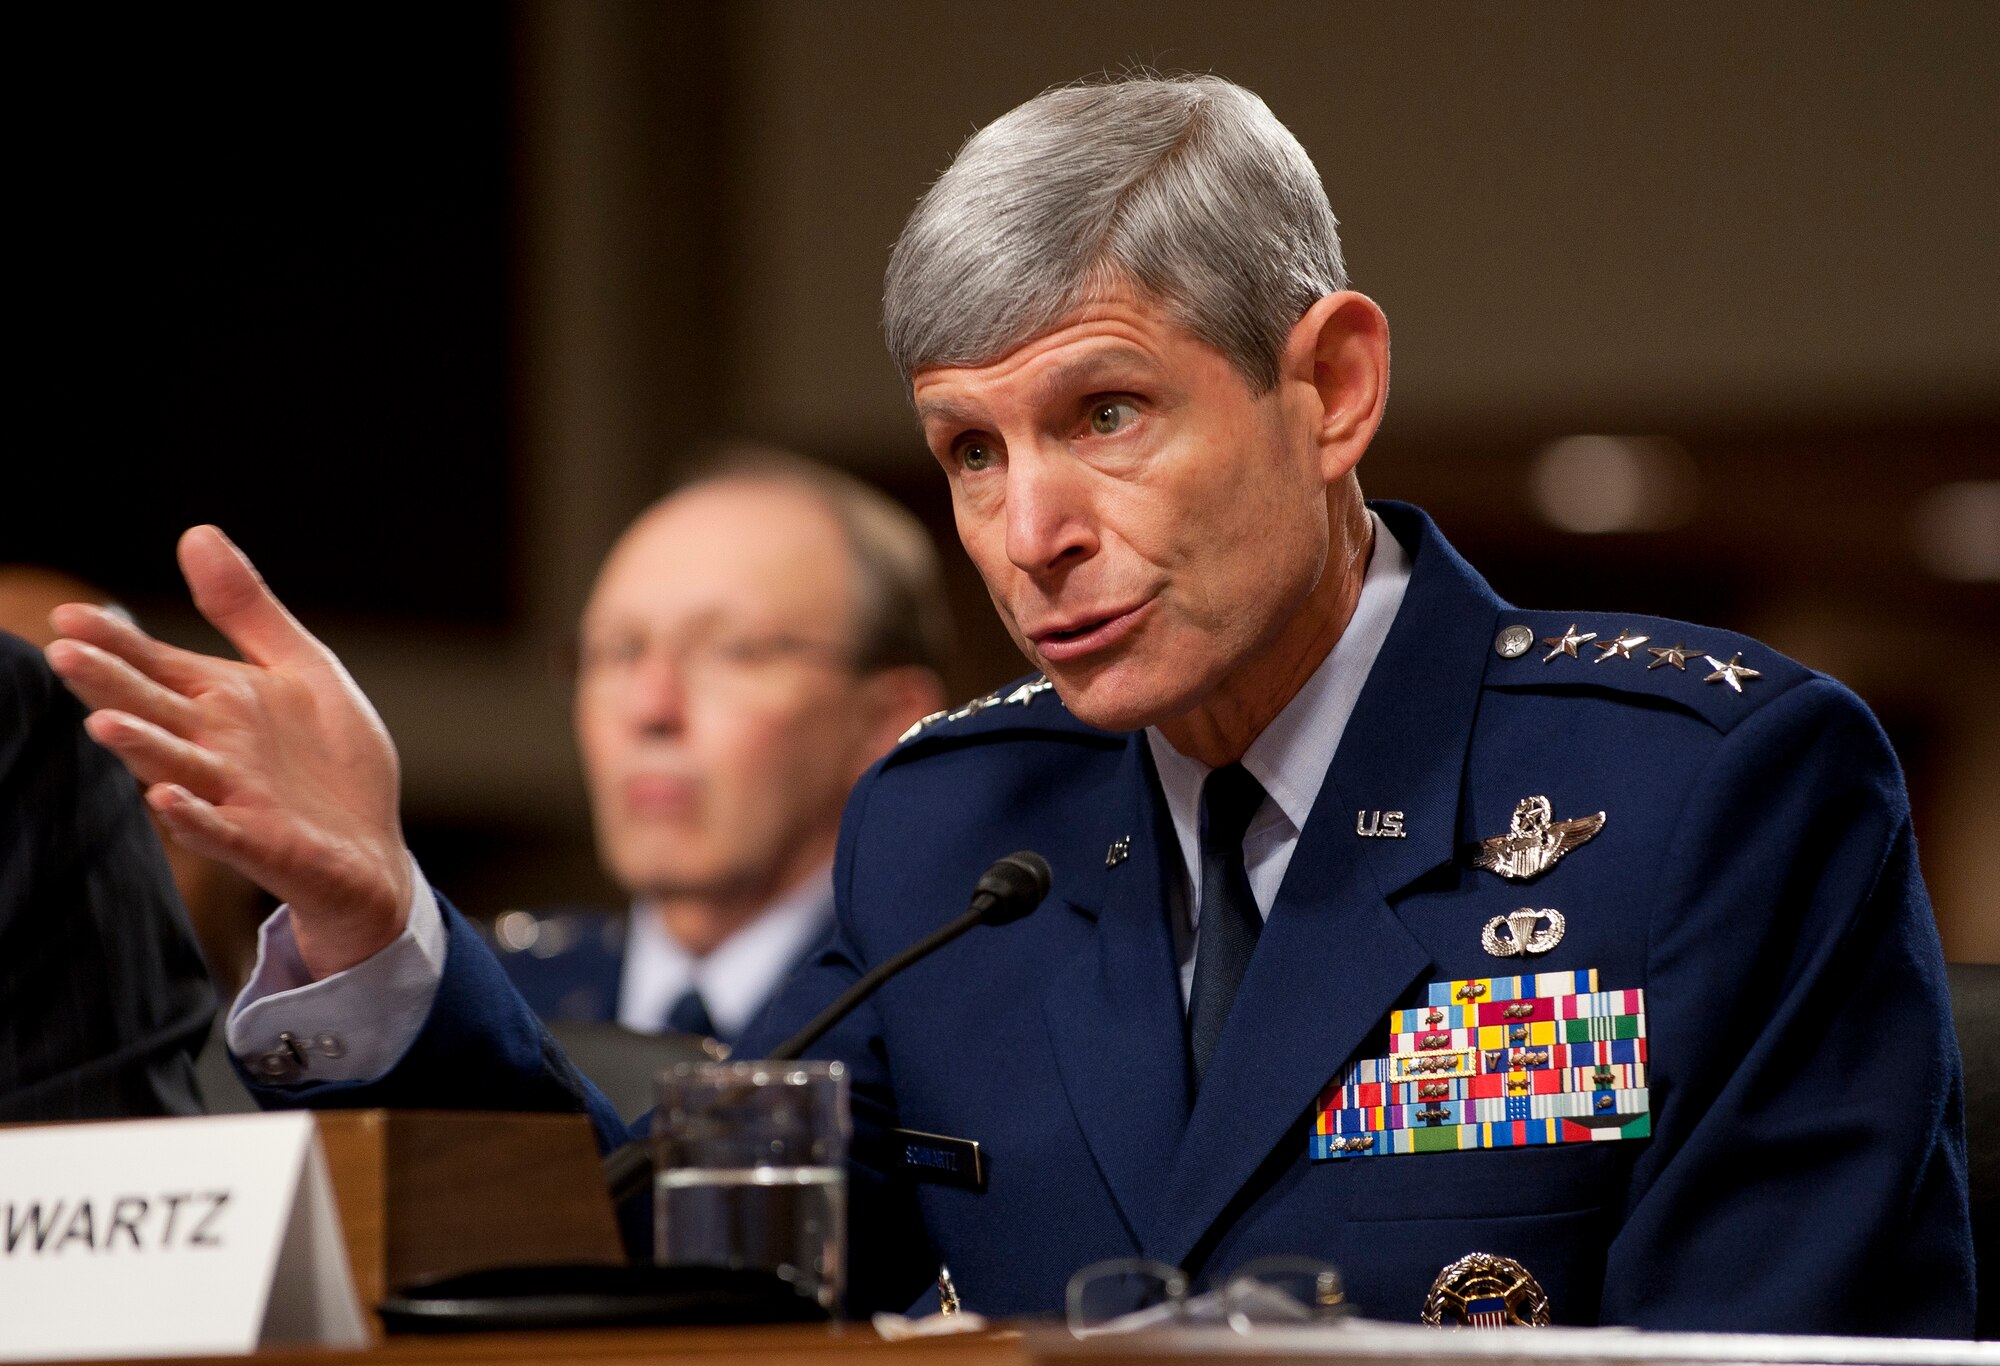 Air Force Chief of Staff Gen. Norton Schwartz answers a question during a
hearing of the Senate Armed Services Committee, March 20, 2012, in
Washington, D.C. Both Schwartz and Secretary of the Air Force Michael Donley
were on Capitol Hill to discuss the Air Force's fiscal 2013 budget request
and the Future Years Defense Program. (U.S. Air Force photo/Jim Varhegyi)
